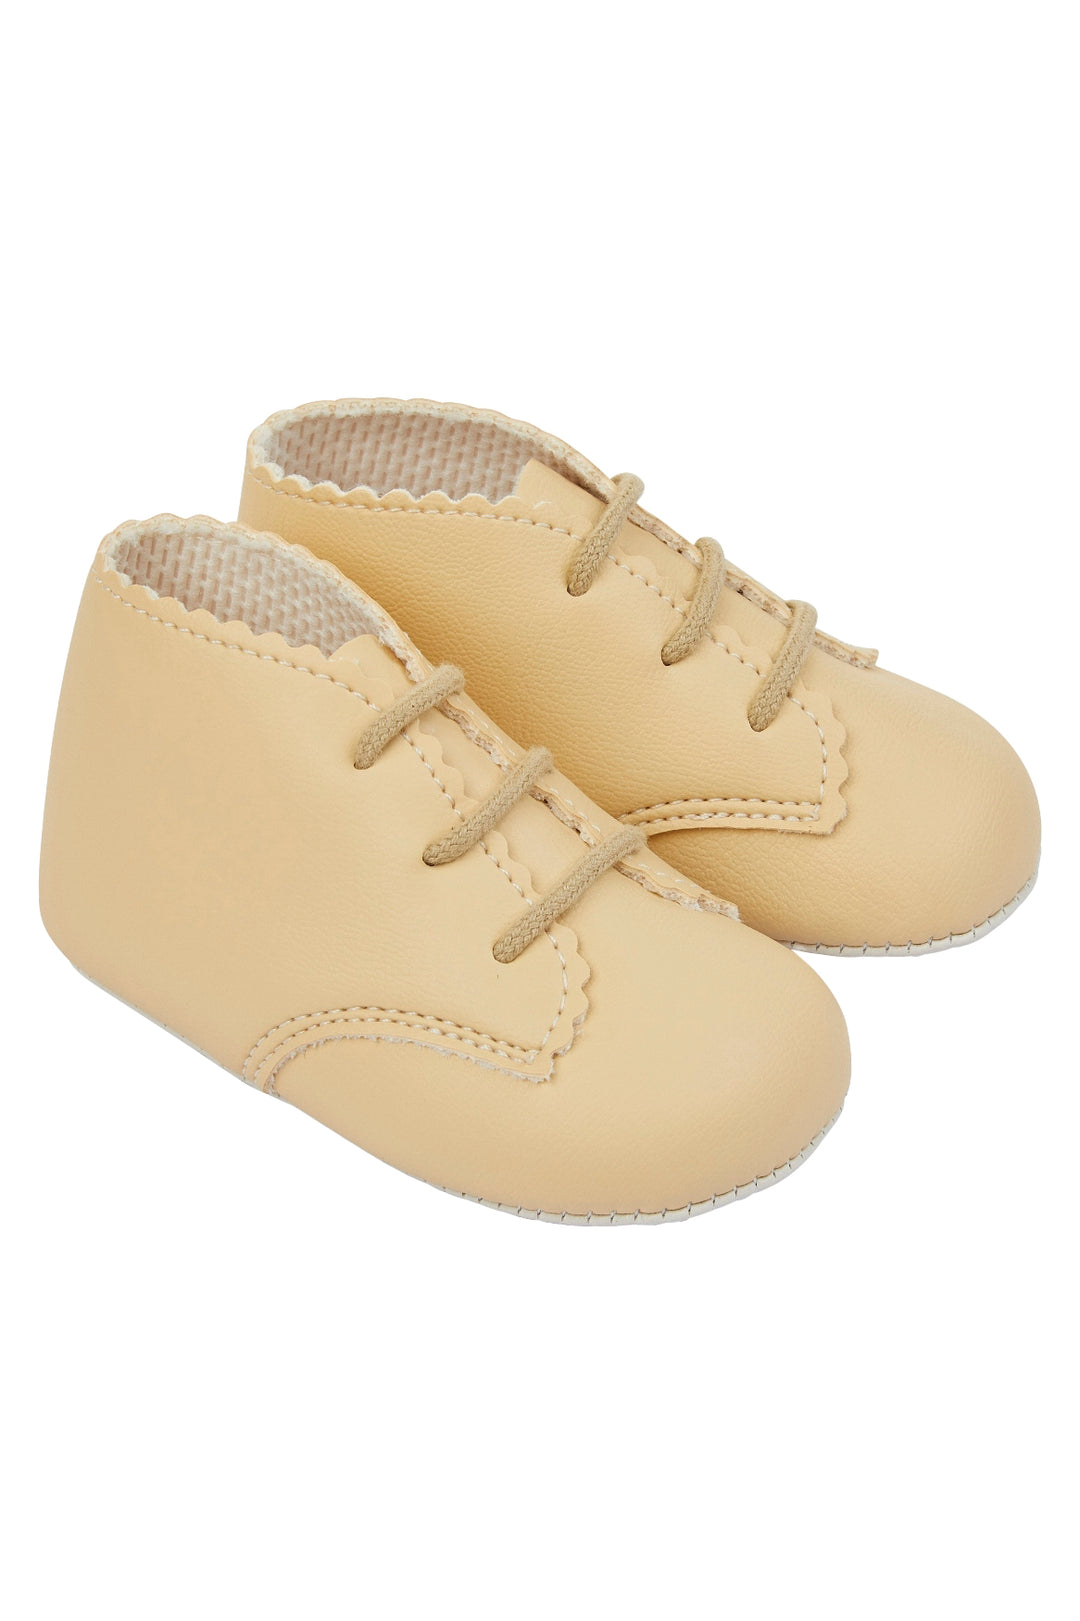 Baypods Barley Soft Sole Booties | Millie and John